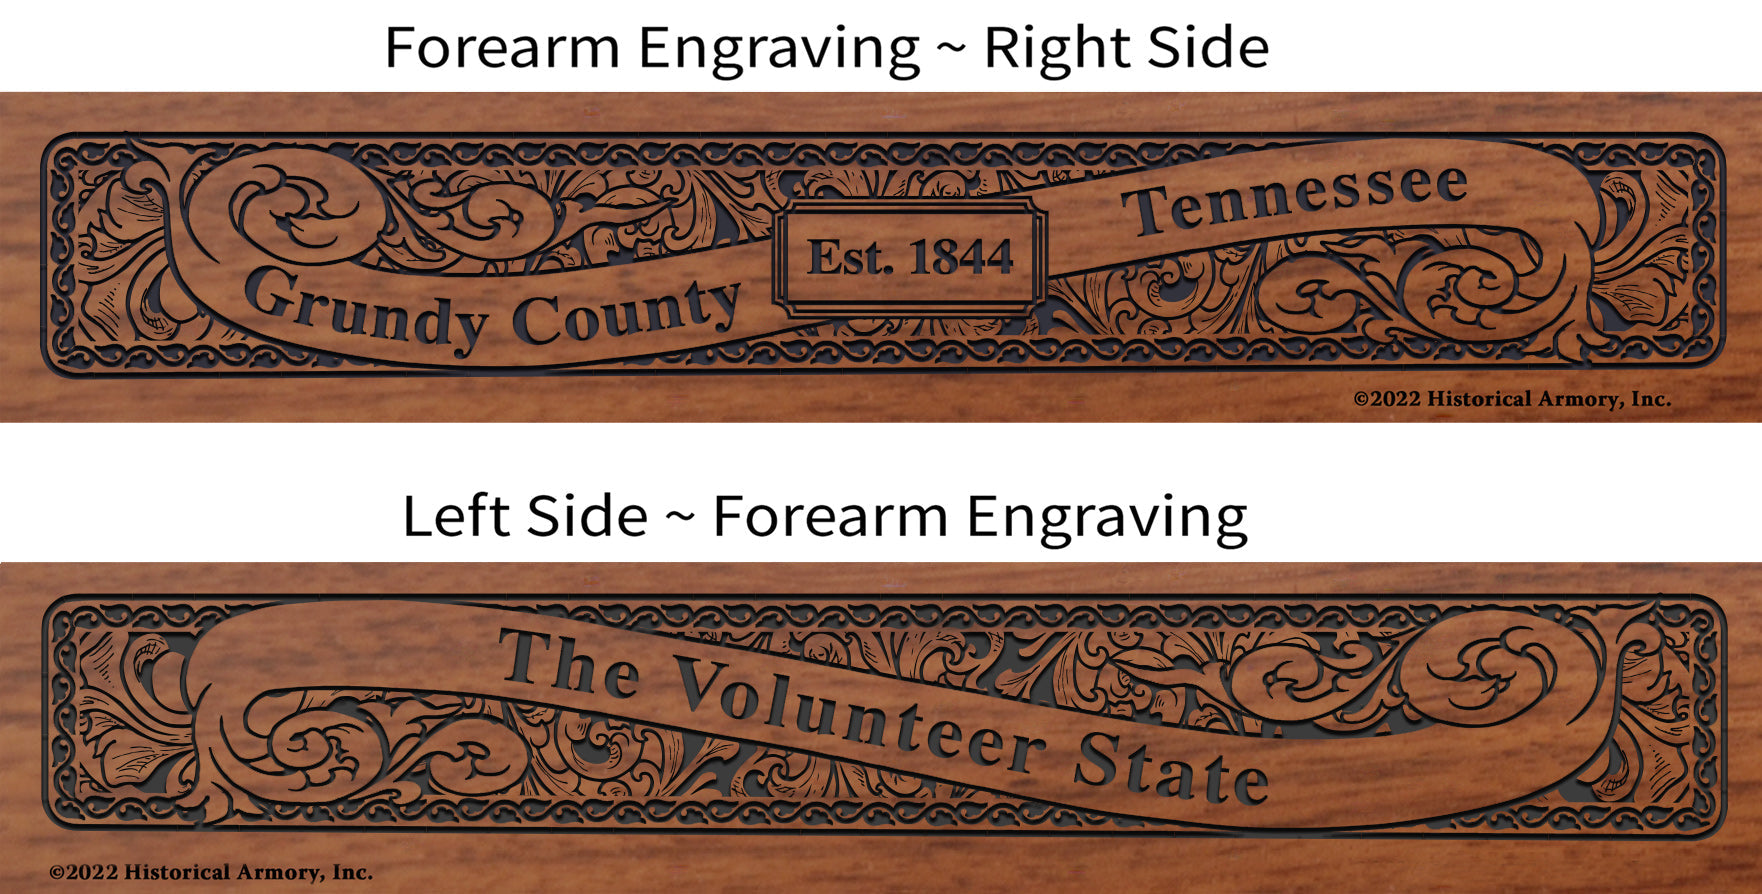 Grundy County Tennessee Engraved Rifle Forearm